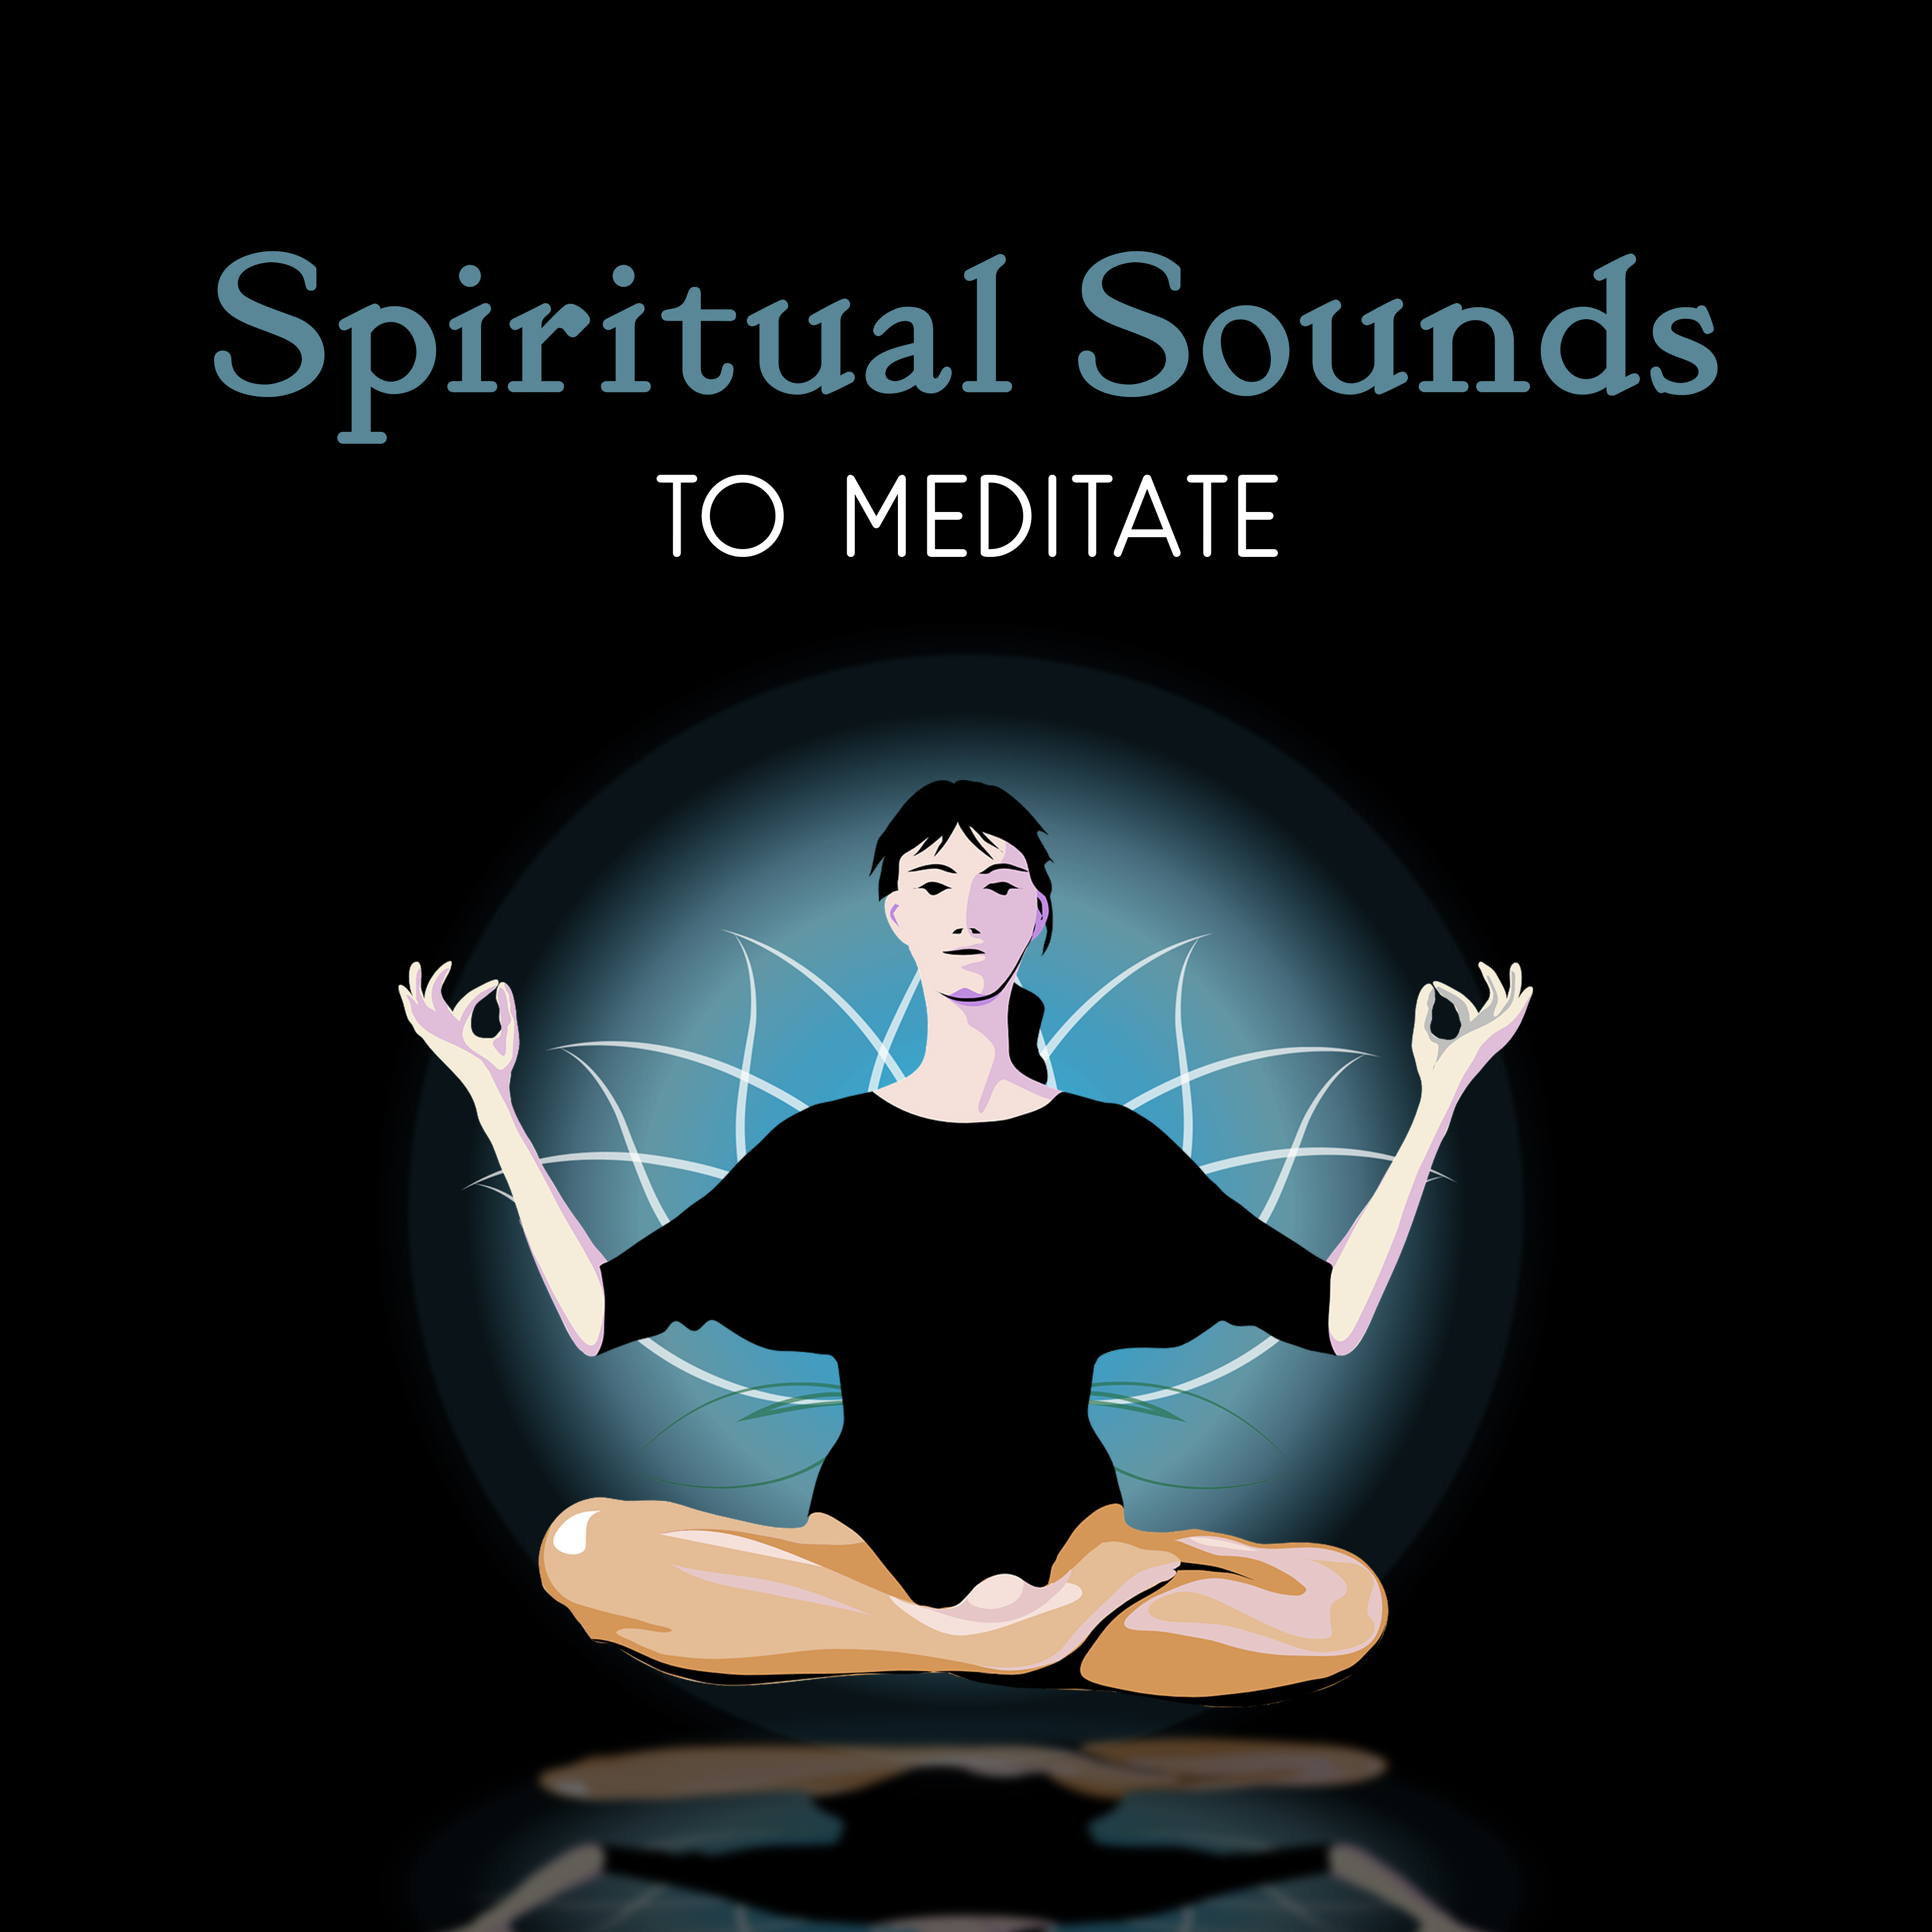 Spiritual Sounds to Meditate – Inner Calmness, Spirit Free, Deep Relaxation Music, New Age to Meditate